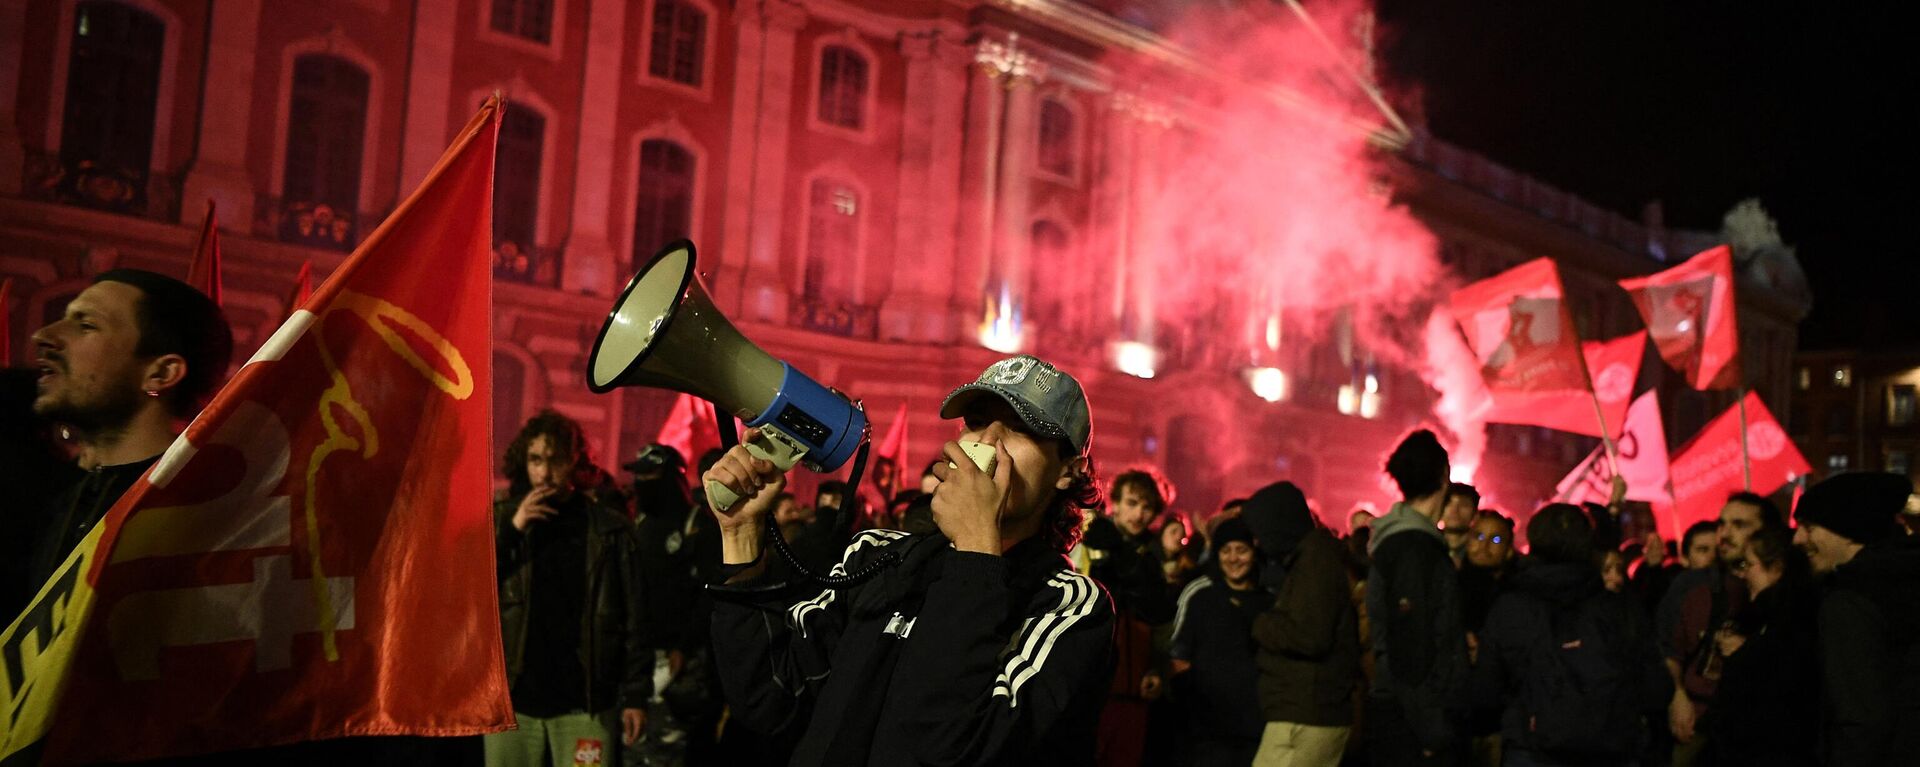 A protester uses a megaphone on the square of the Capitole de Toulouse during a demonstration after the French government pushed a pensions reform through parliament without a vote, using the article 49,3 of the constitution, in Toulouse, south-western France, on March 16, 2023.  - Sputnik International, 1920, 17.03.2023